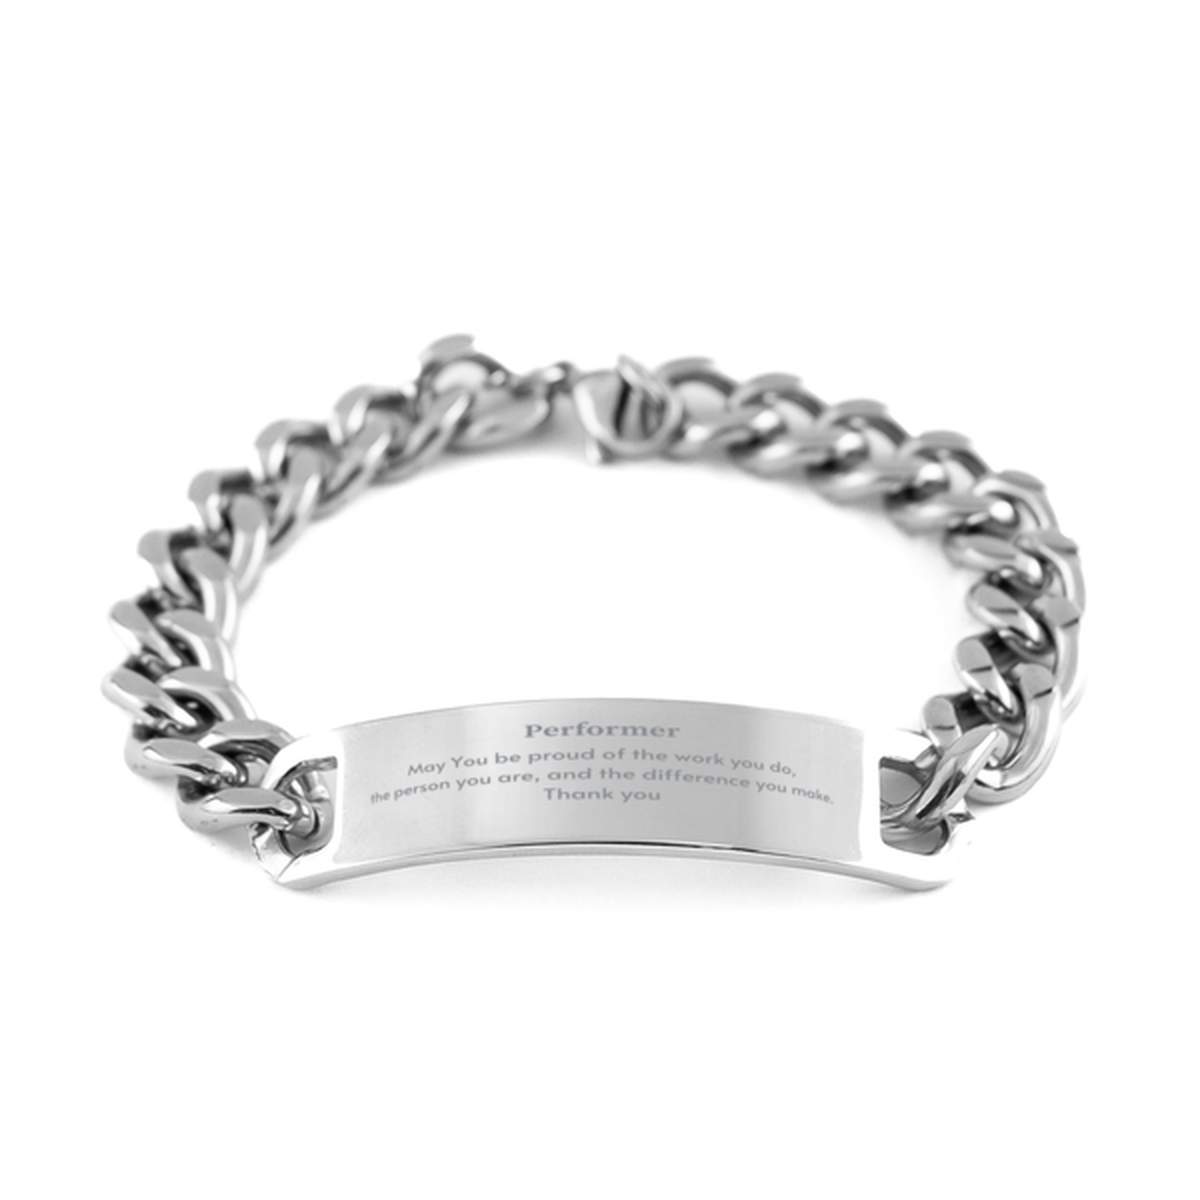 Heartwarming Cuban Chain Stainless Steel Bracelet Retirement Coworkers Gifts for Performer, Performer May You be proud of the work you do, the person you are Gifts for Boss Men Women Friends